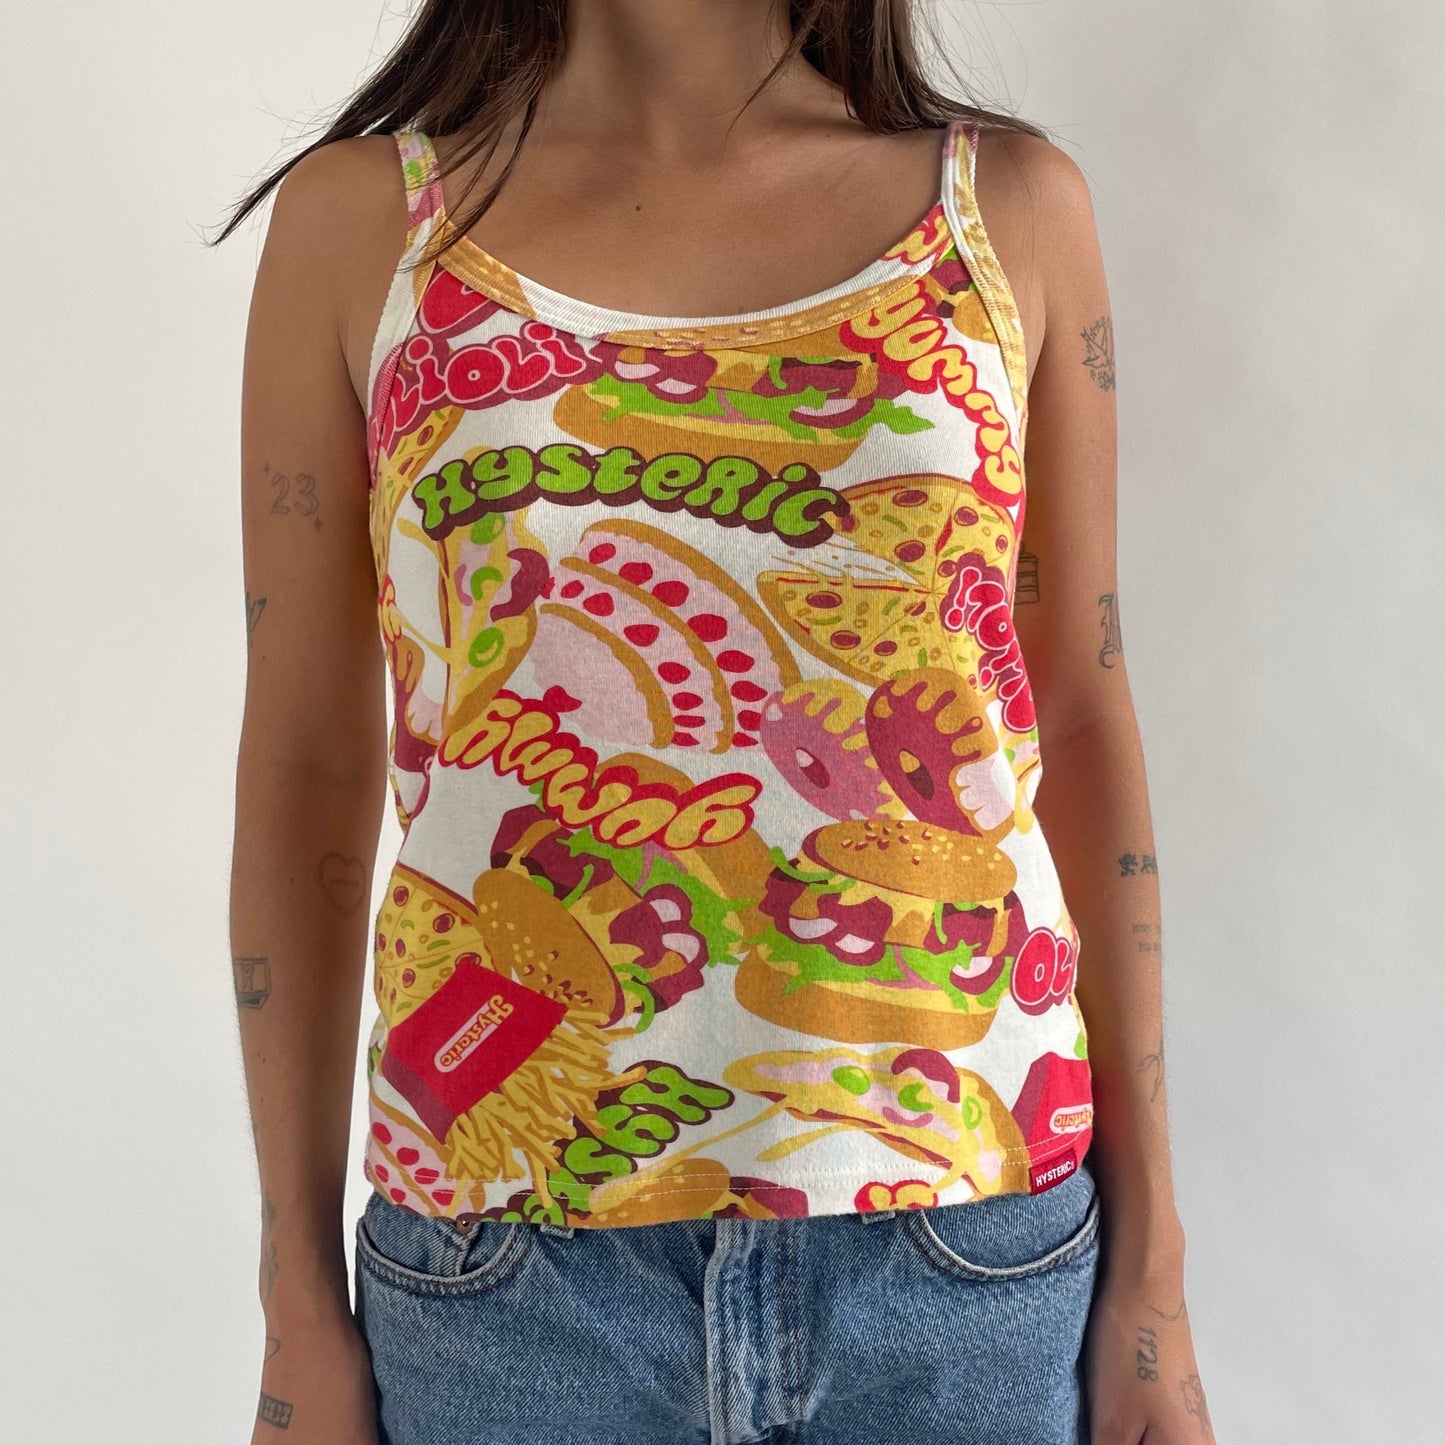 hysteric glamour junk food tank